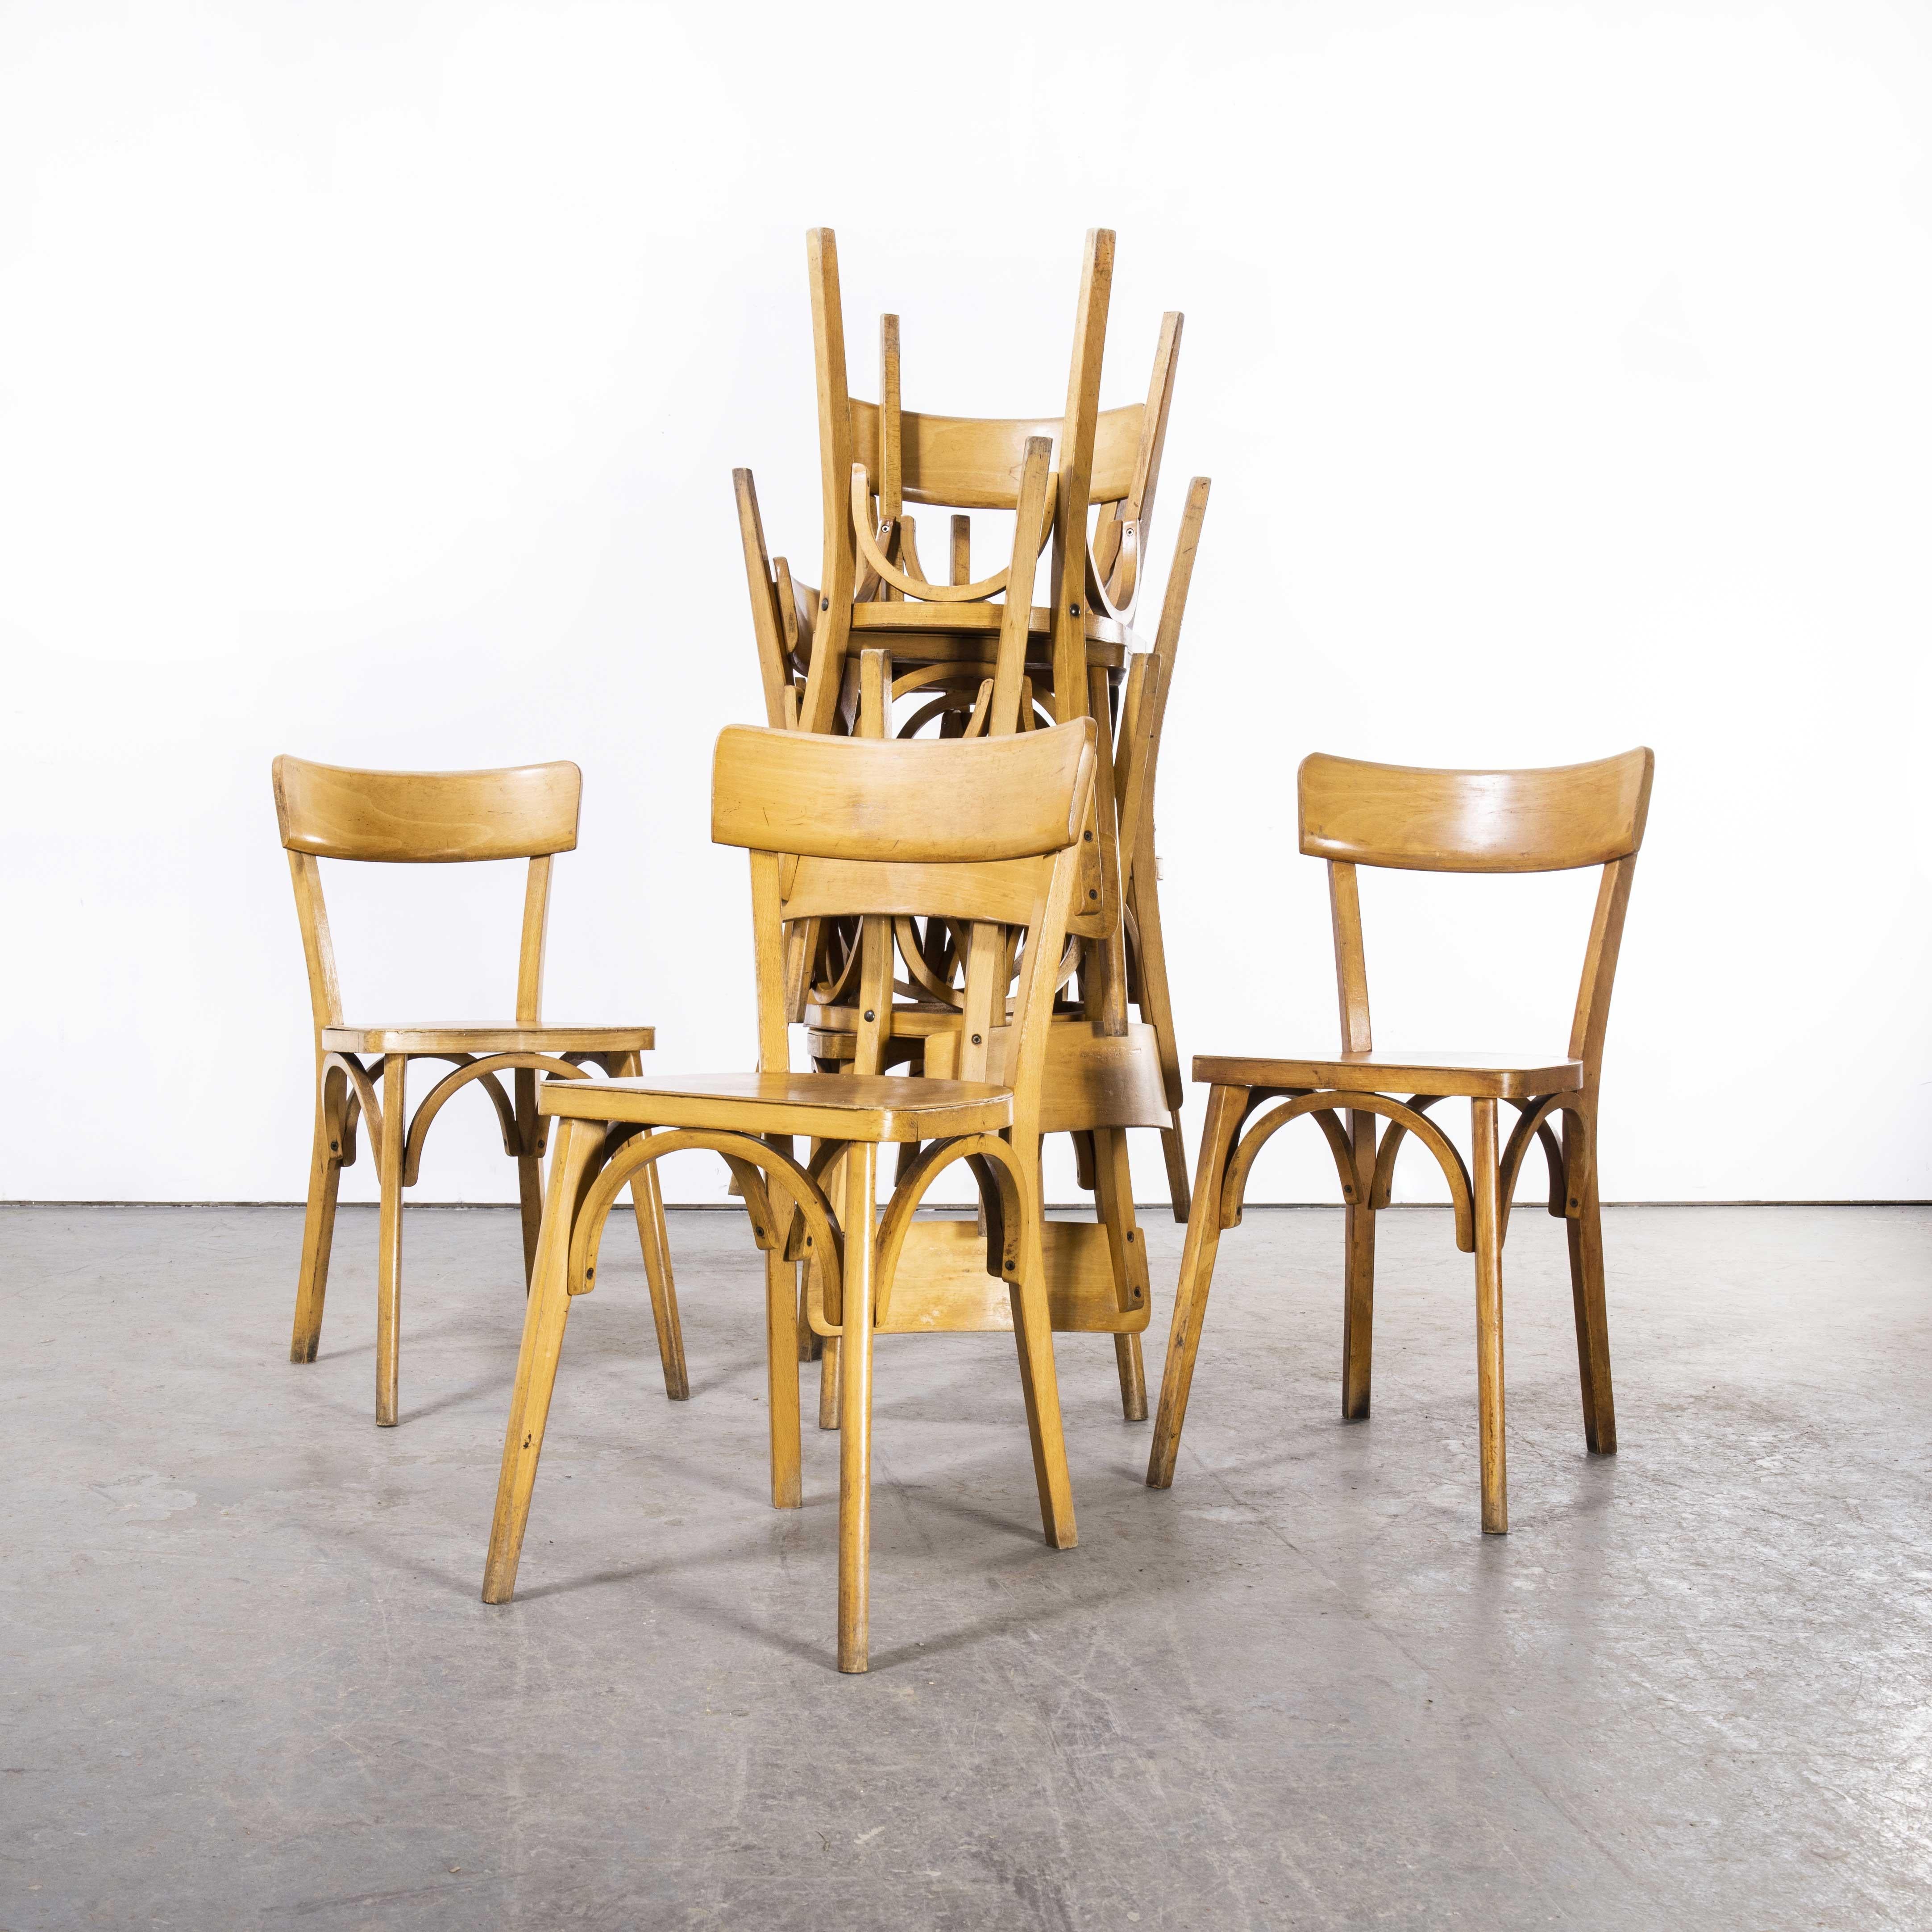 1950’s French Baumann Blonde slim back bentwood dining chairs – various quantities available
1950’s French Baumann Blonde slim back bentwood dining chairs – various quantities available. Baumann is a slightly off the radar French producer just